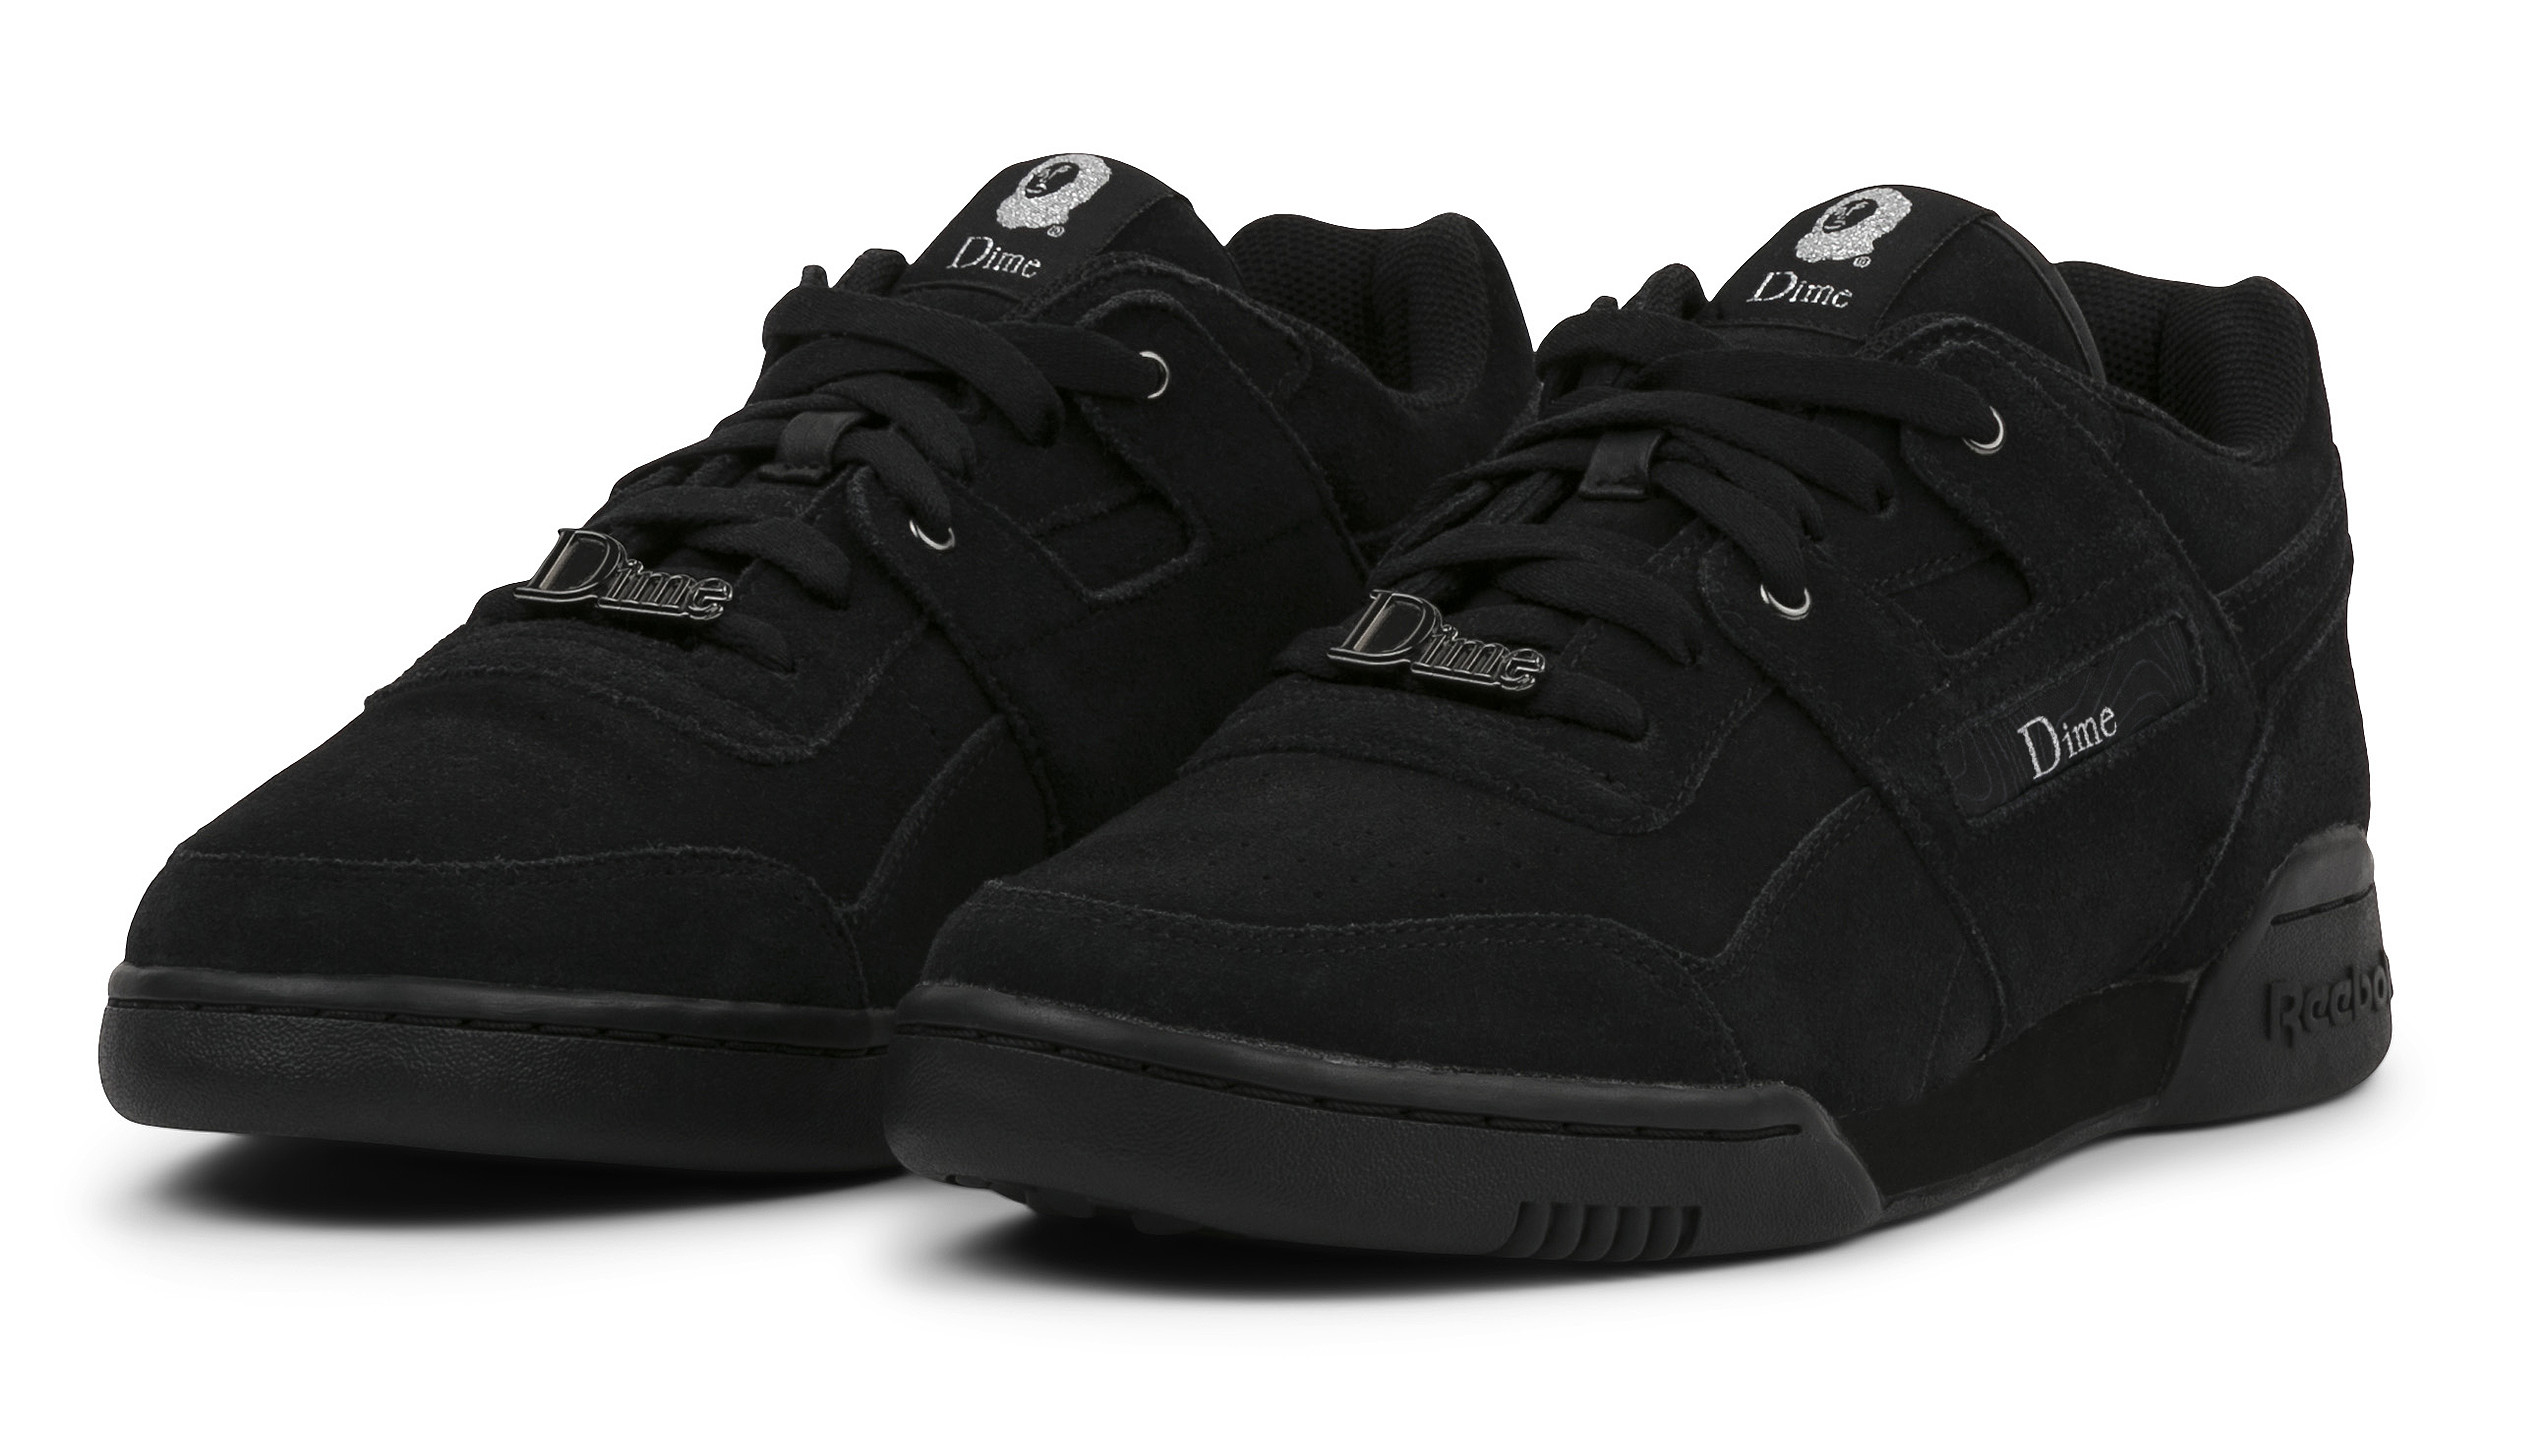 Dime's New Reebok Collab Drops This Week | Complex